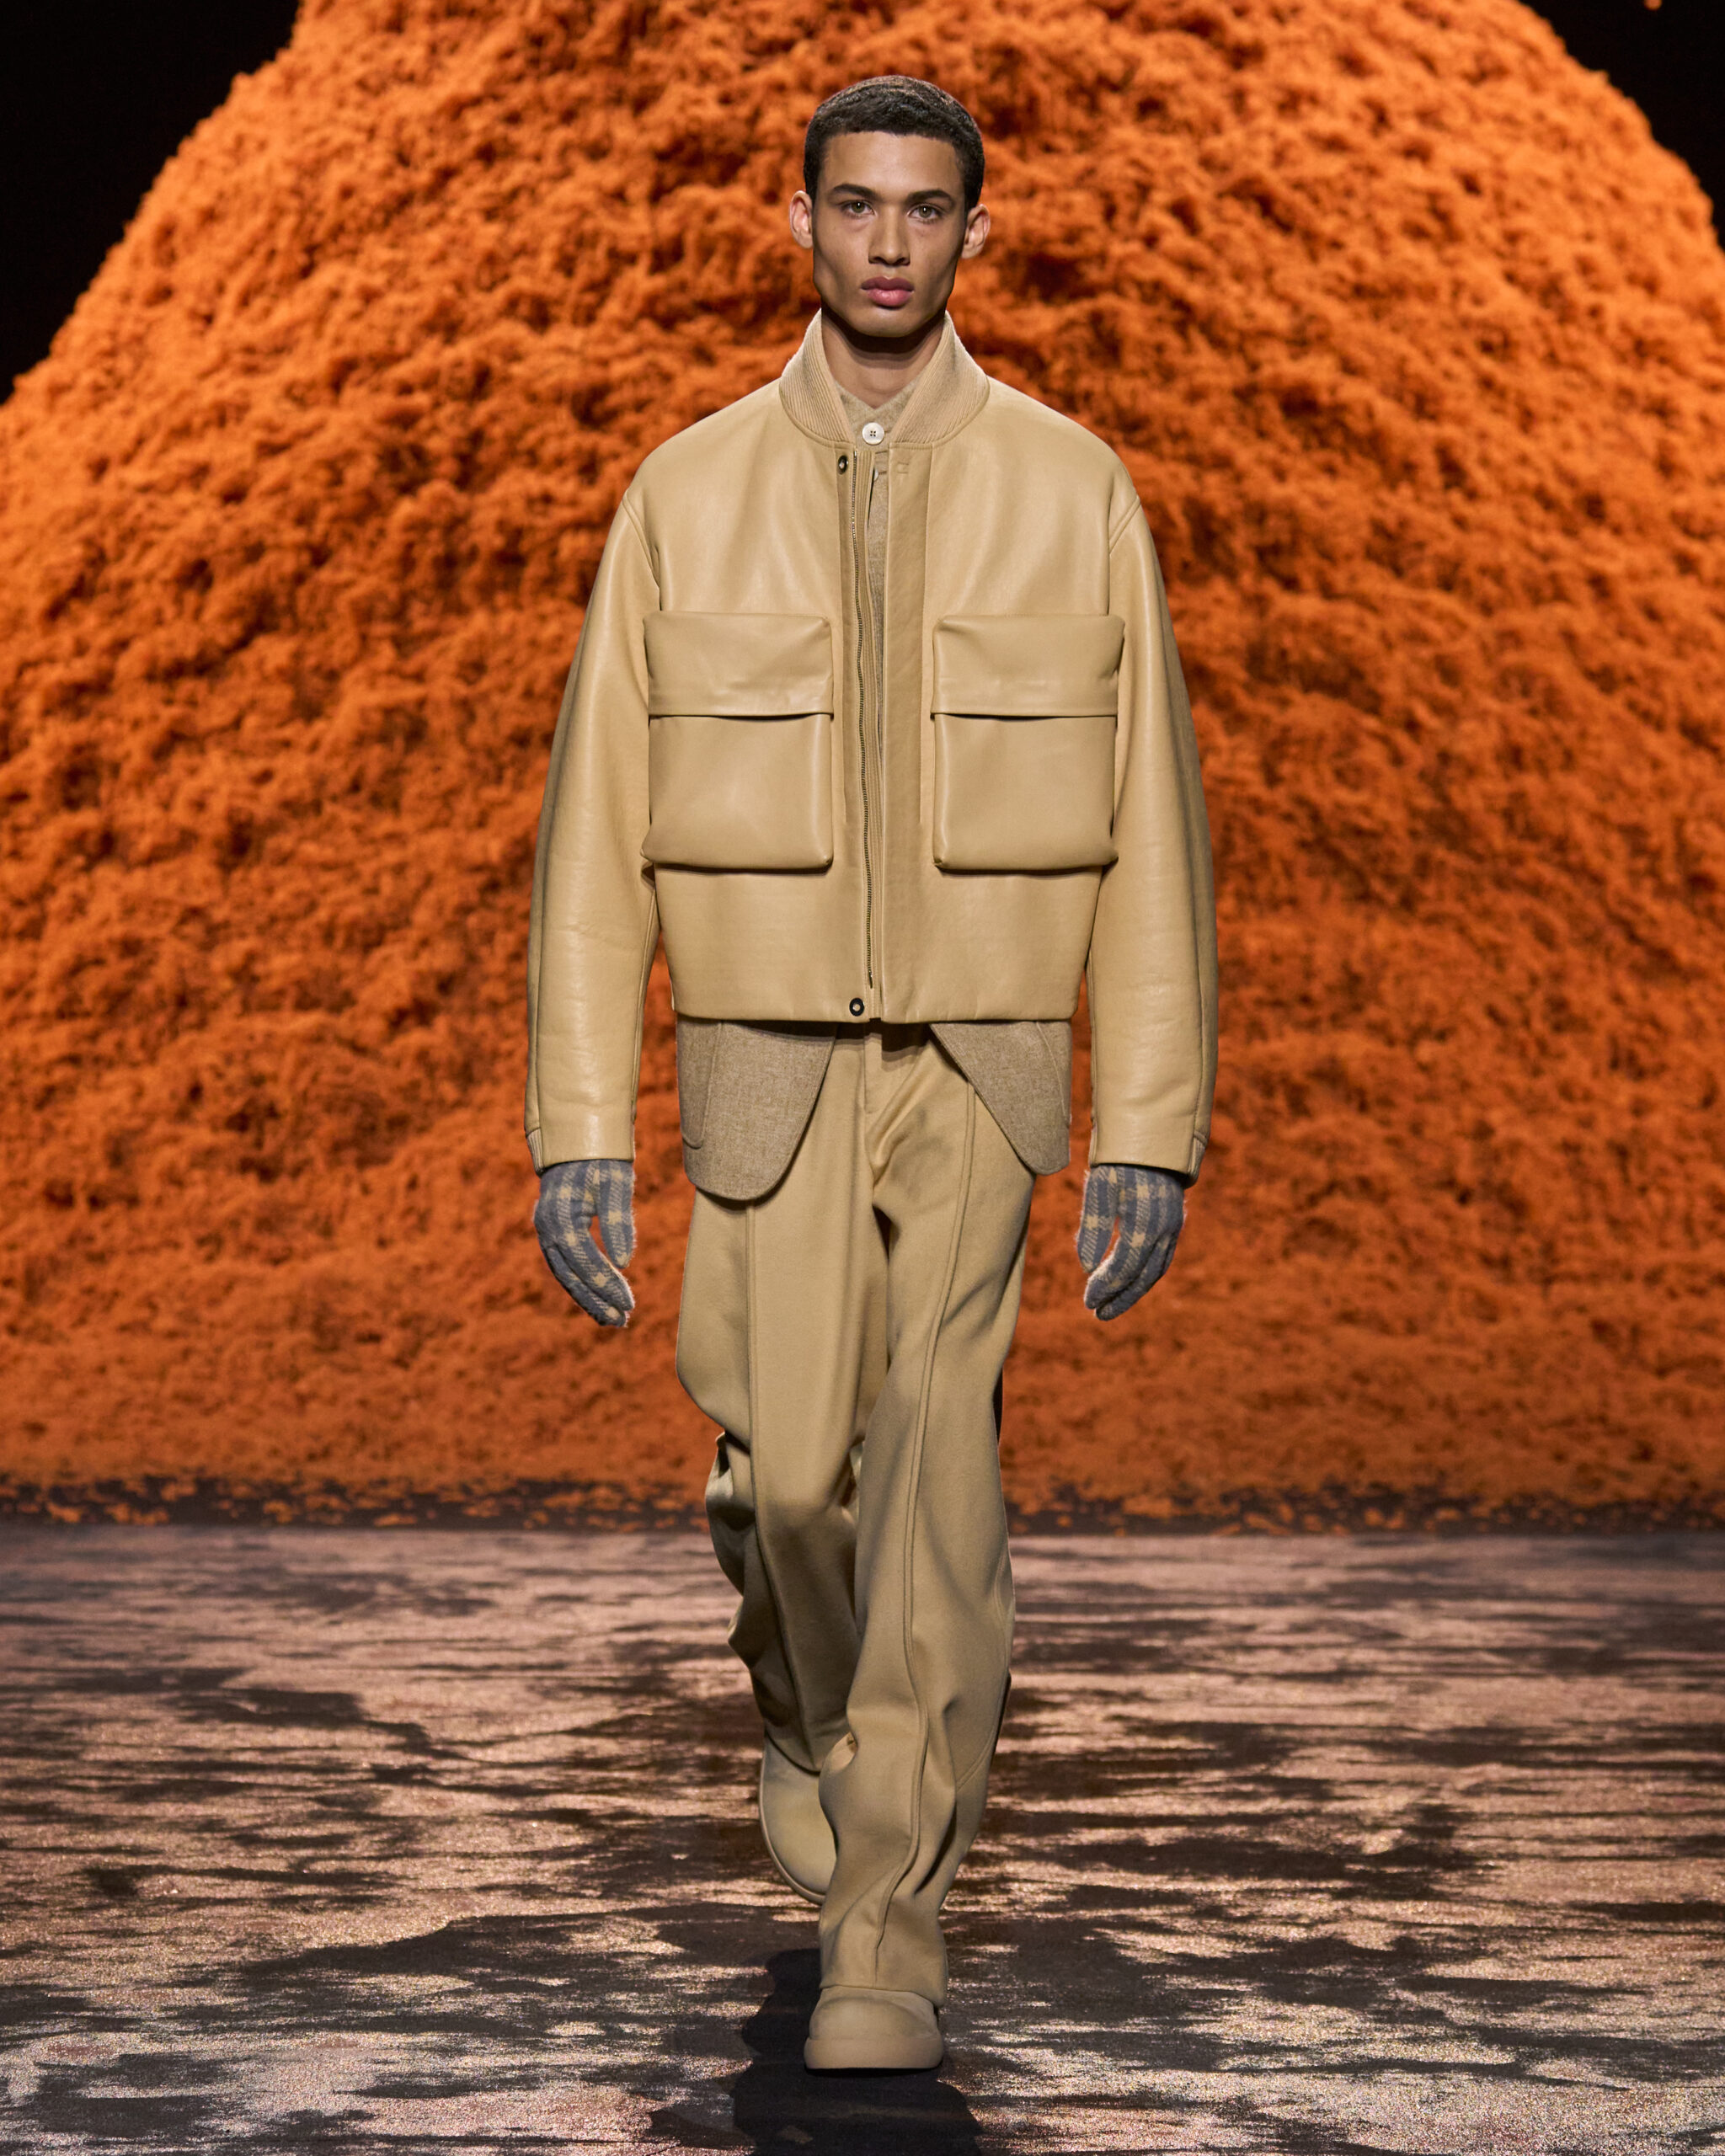 ZEGNA - In the Oasi of Cashmere